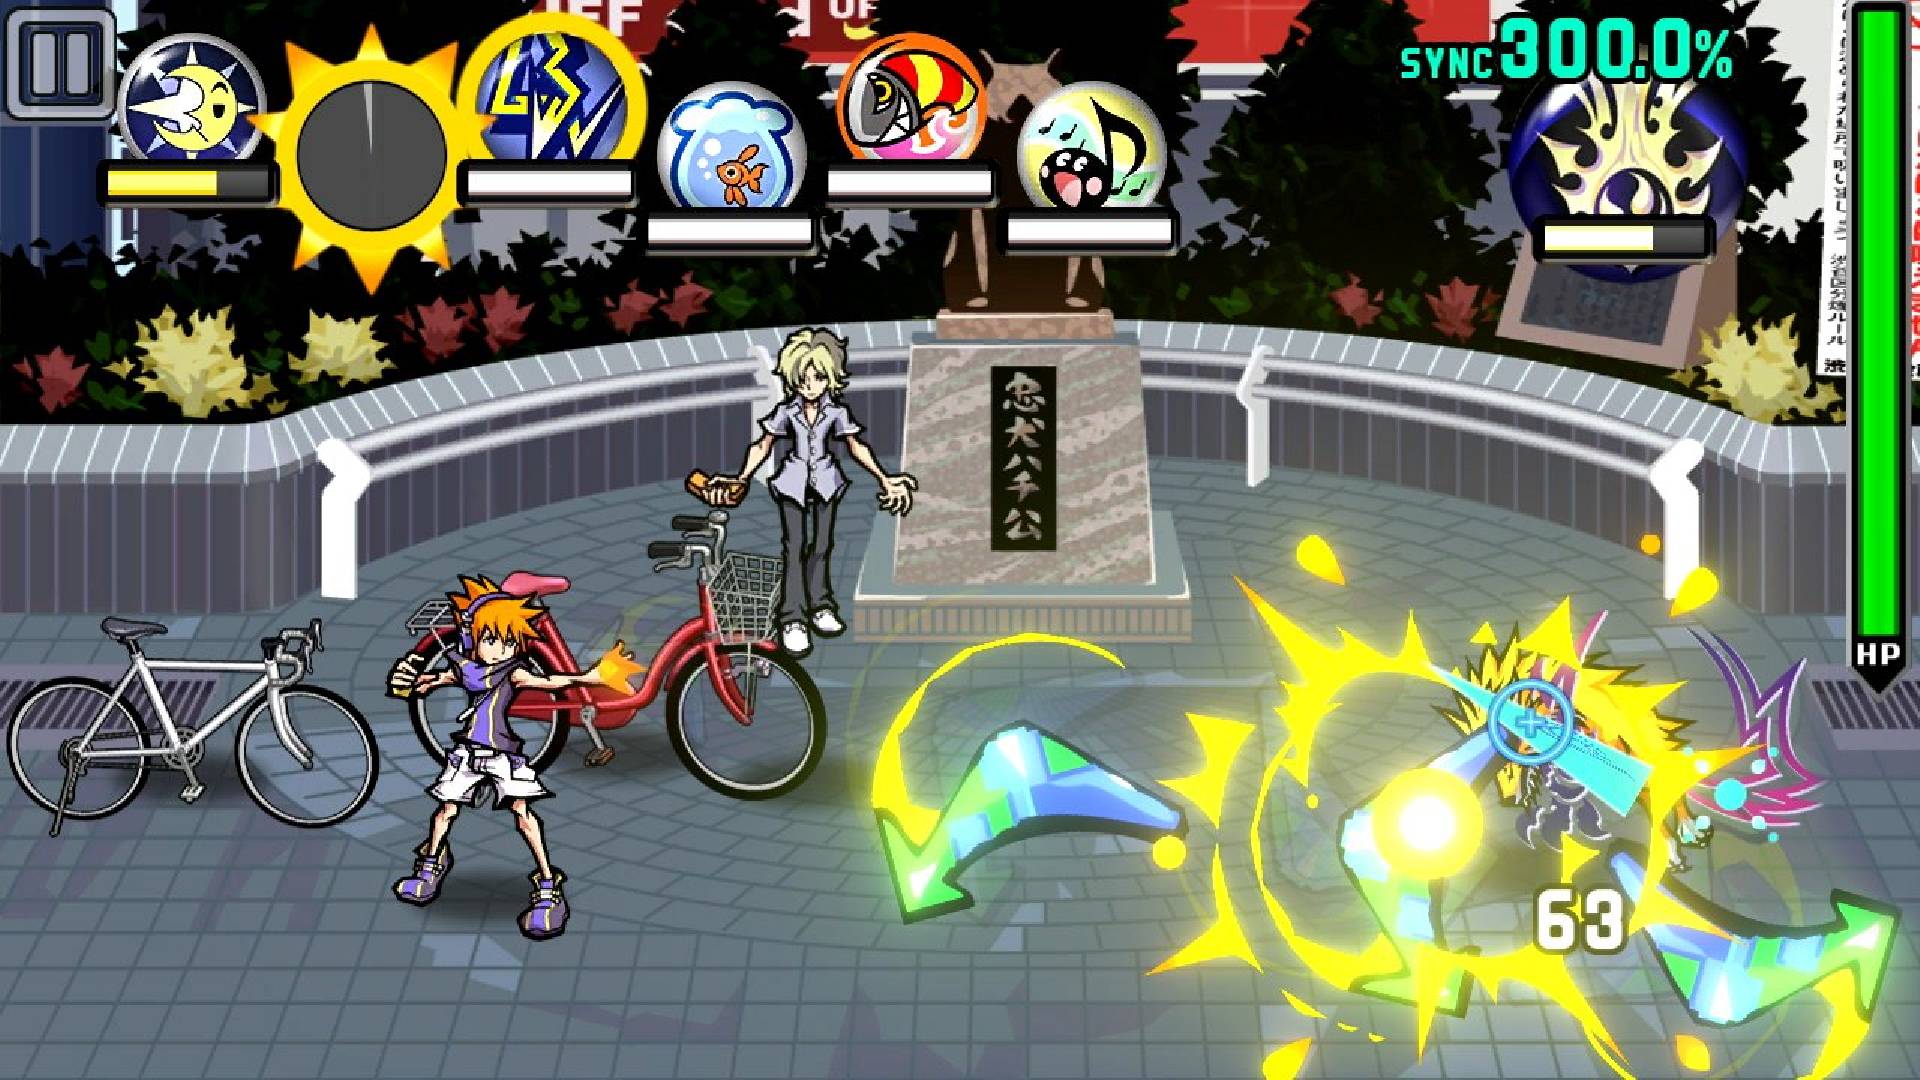 NEO The World Ends With You Gameplay 